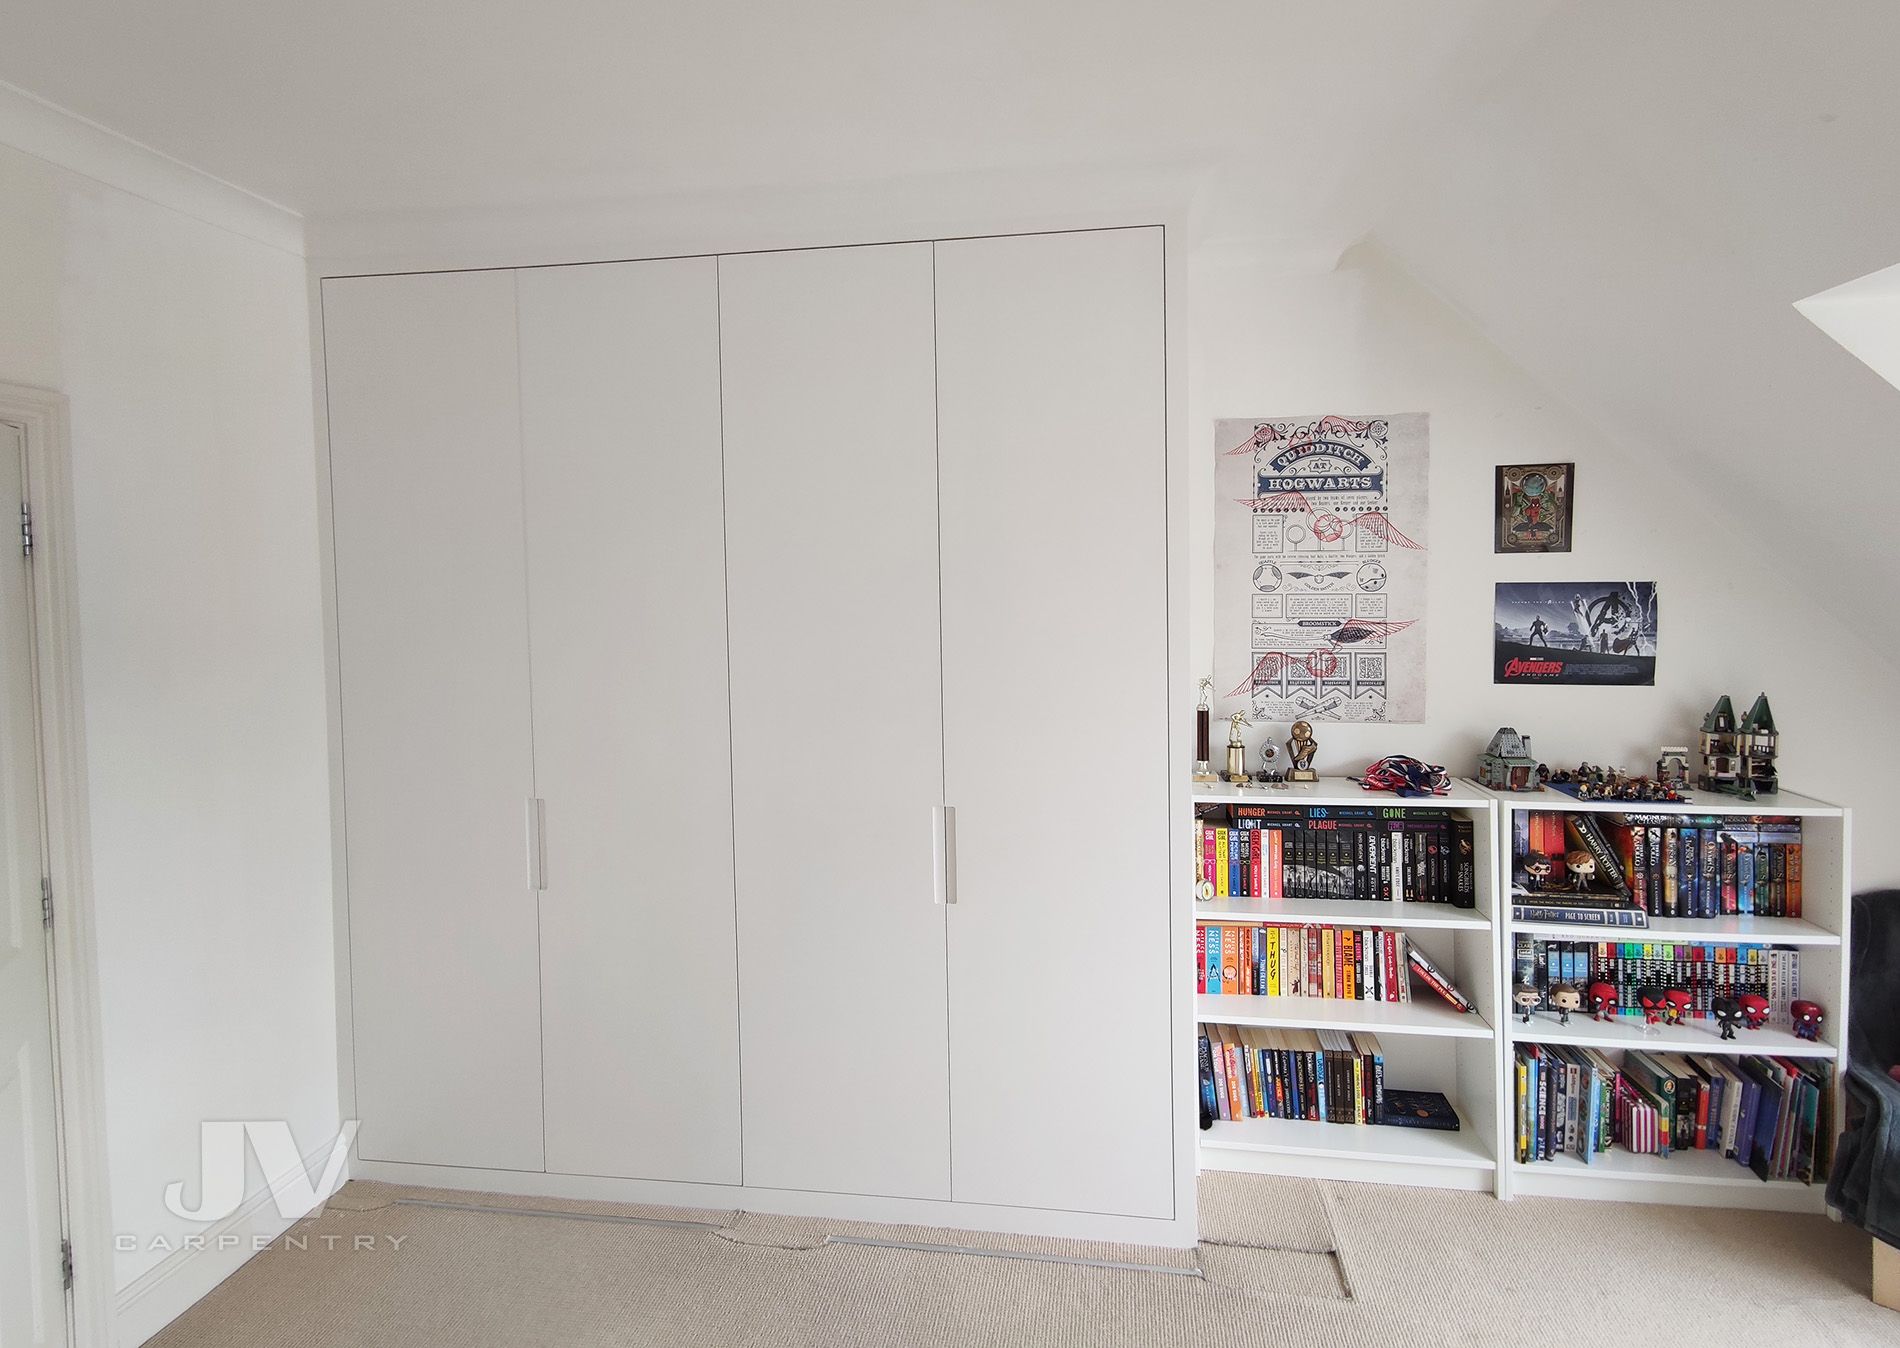 White Built In Wardrobes Ideas | Jv Carpentry With Regard To Cheap White Wardrobes (View 5 of 15)